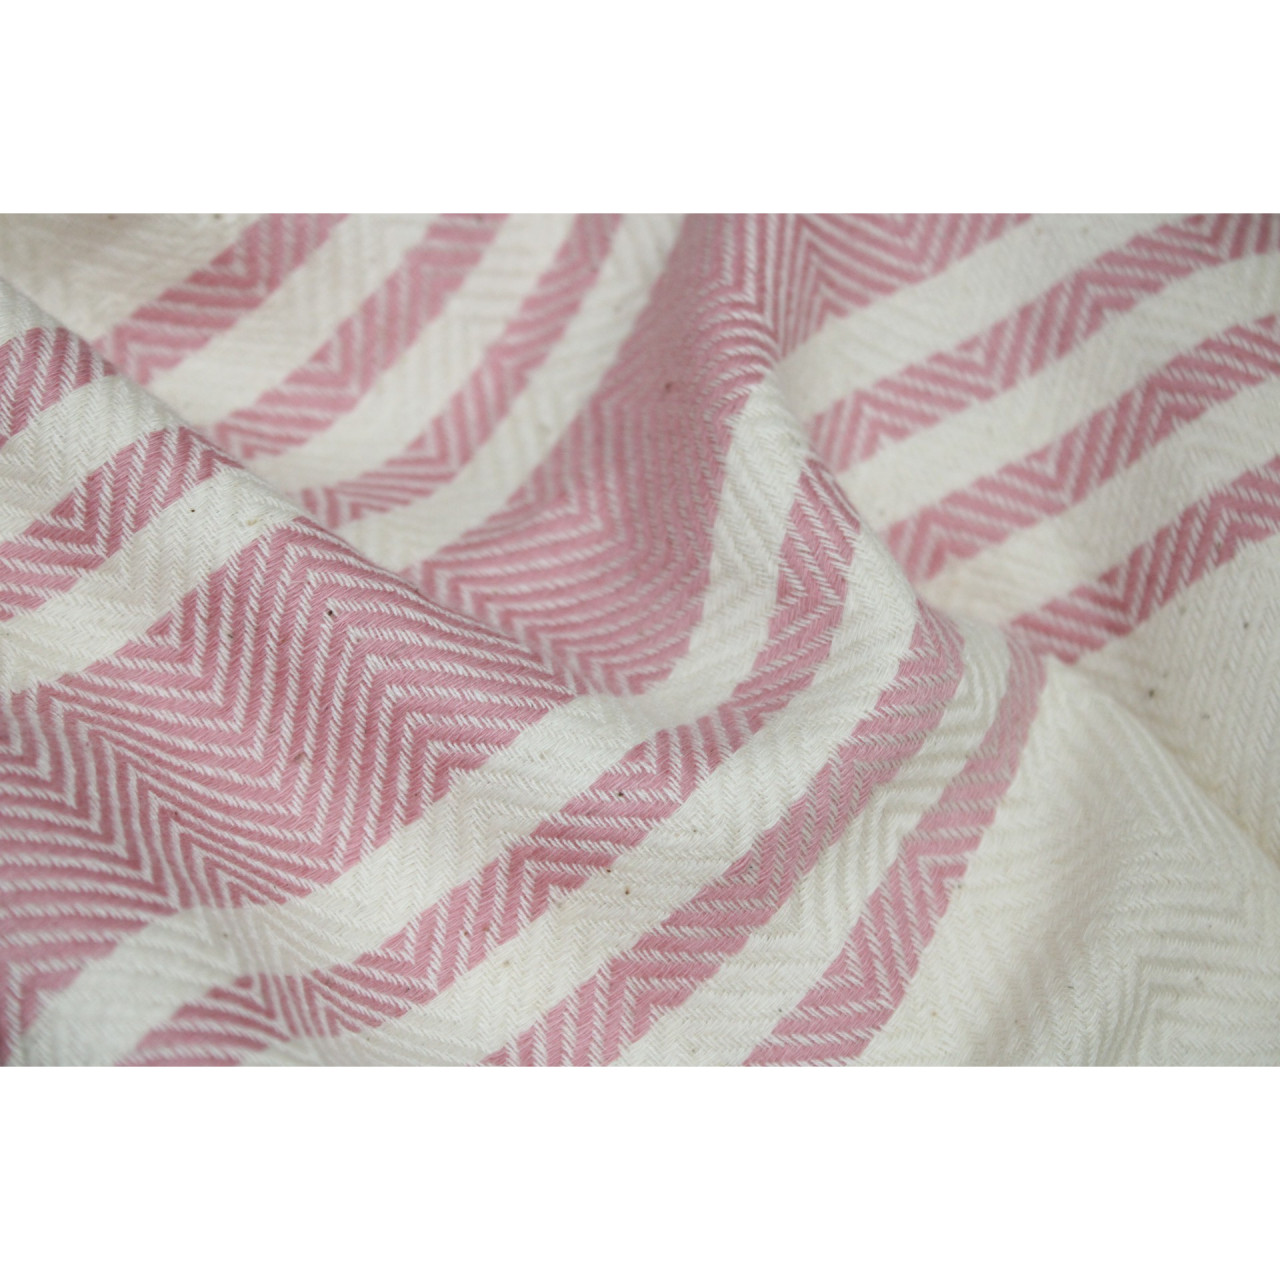 (1435) Cotton and khadi  Azo-free dyed throw from Bihar - White, pink, red, stripes, pompoms, textured